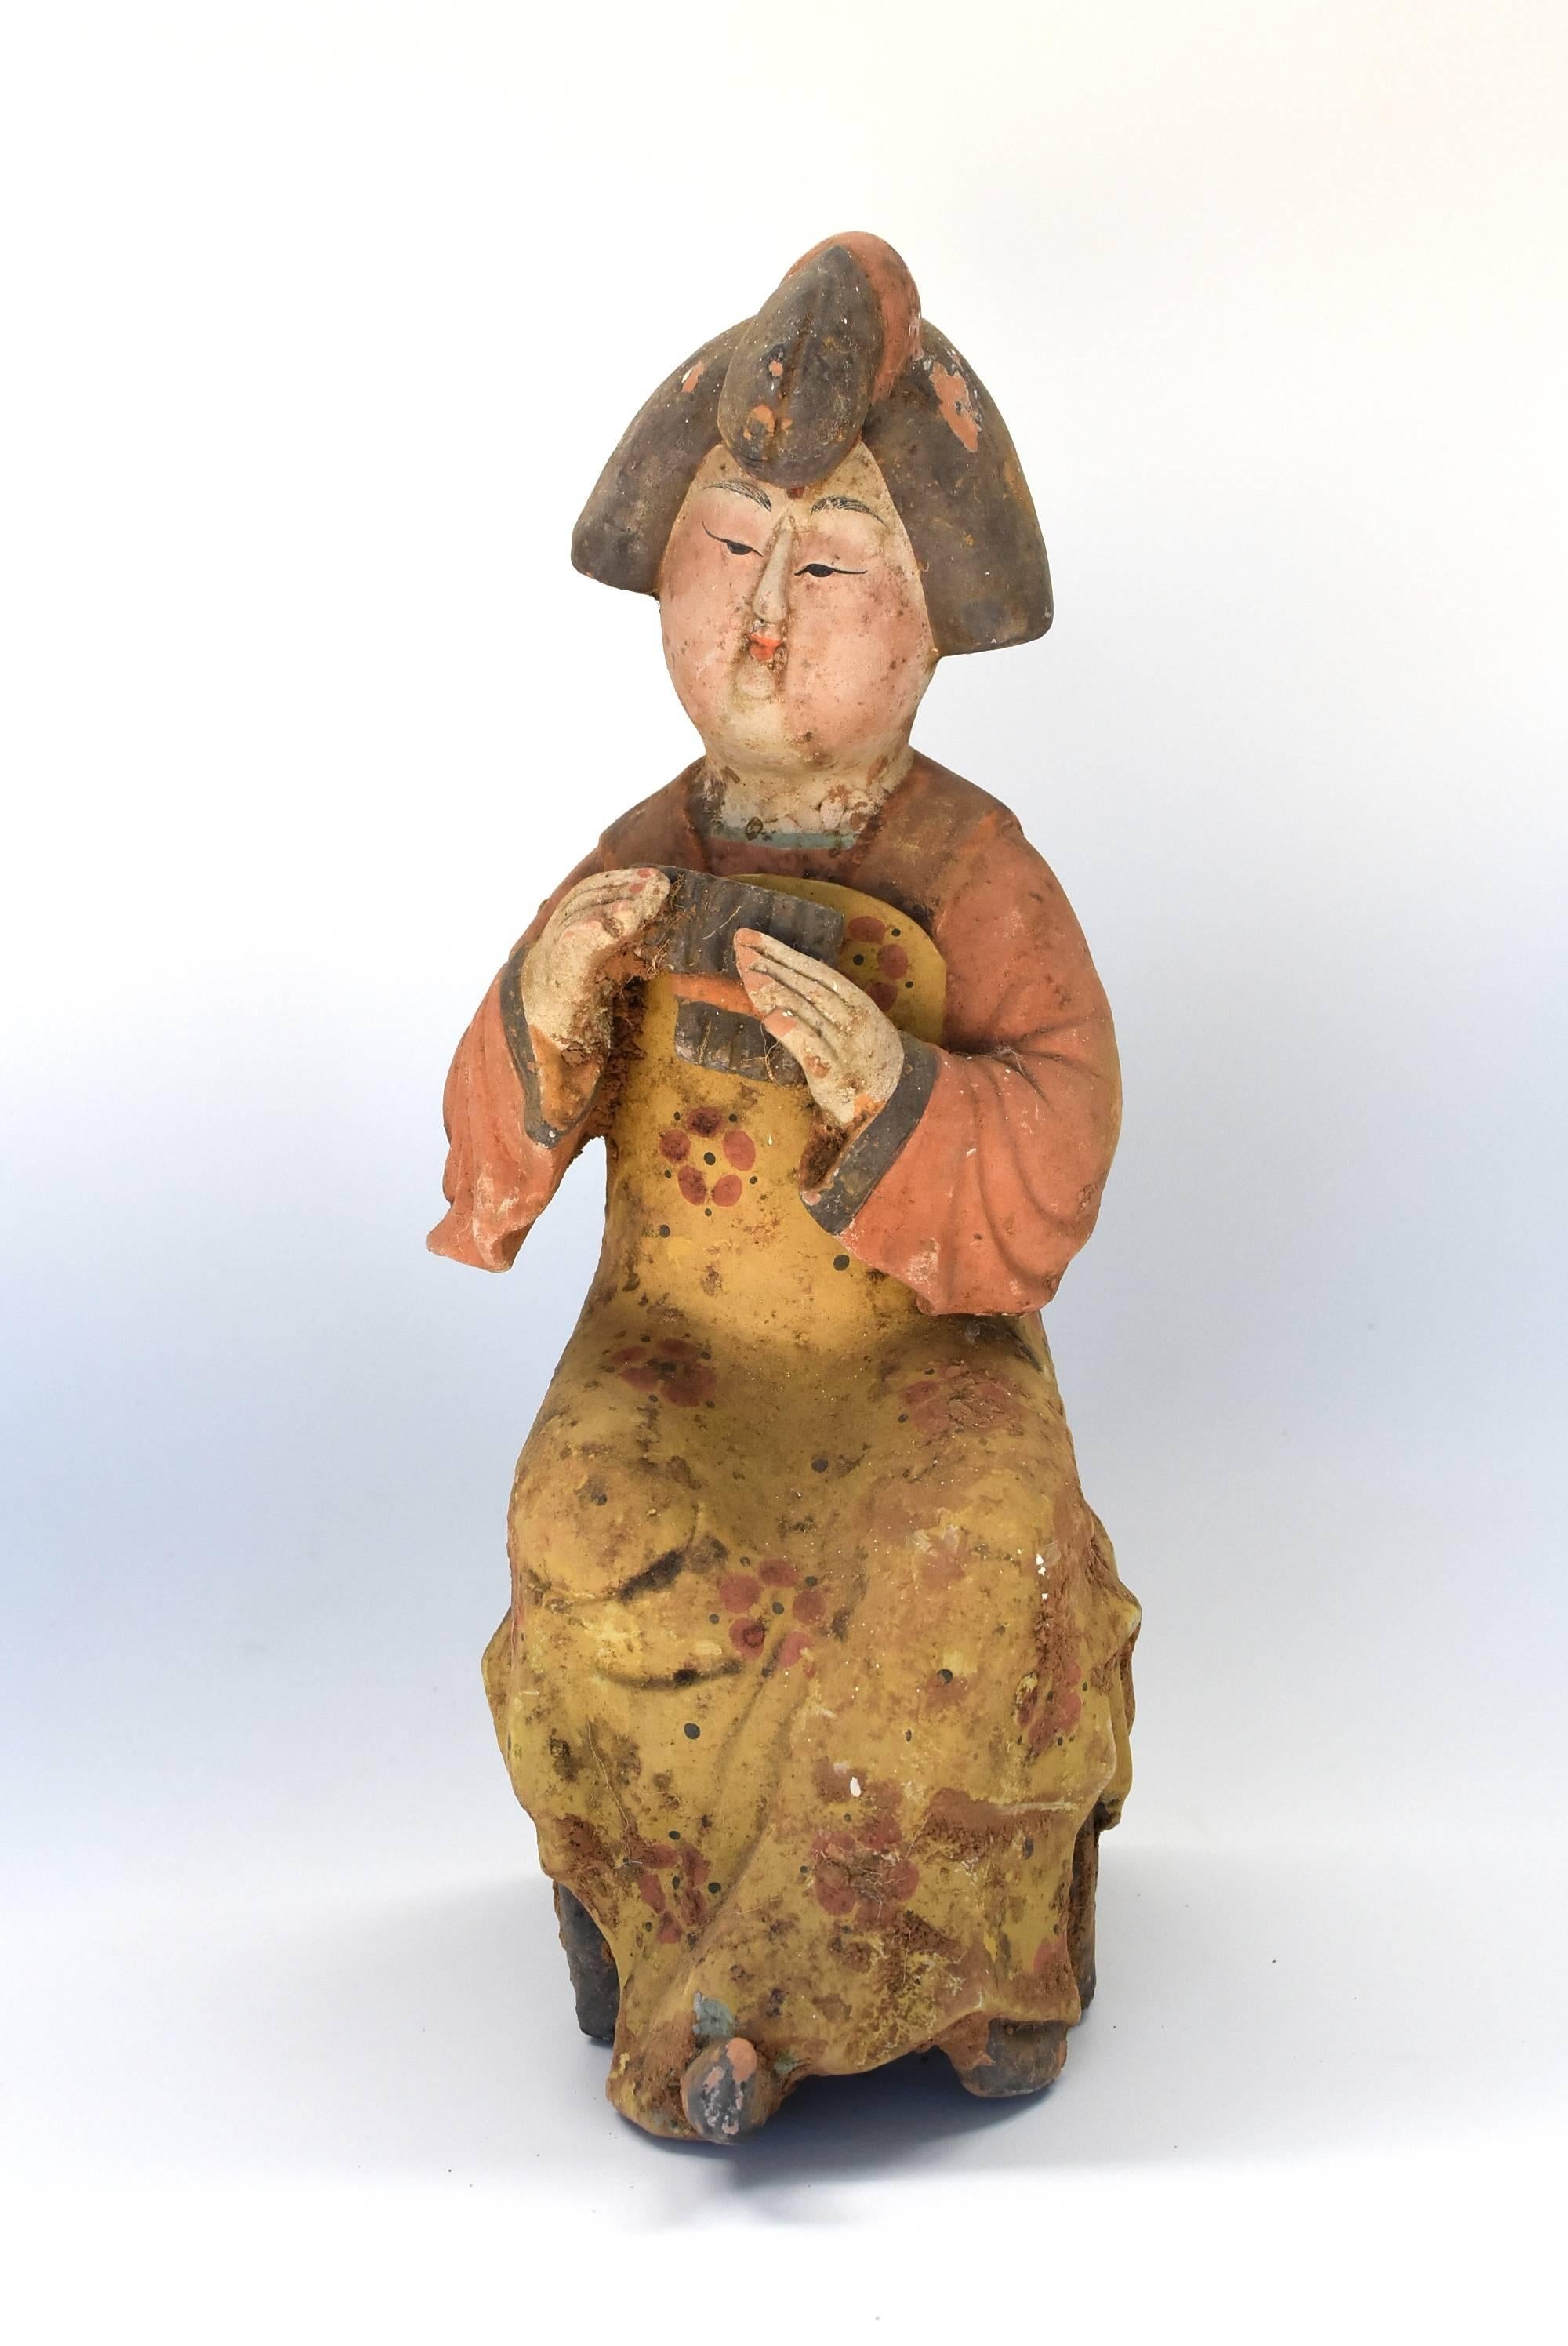 A beautiful terracotta court lady in the Tang dynasty San Cai style. This is an older piece from our special collection. The court lady is a musician. She is seated holding a flute. Her hair style, full round face, small mouth, long eyes are all